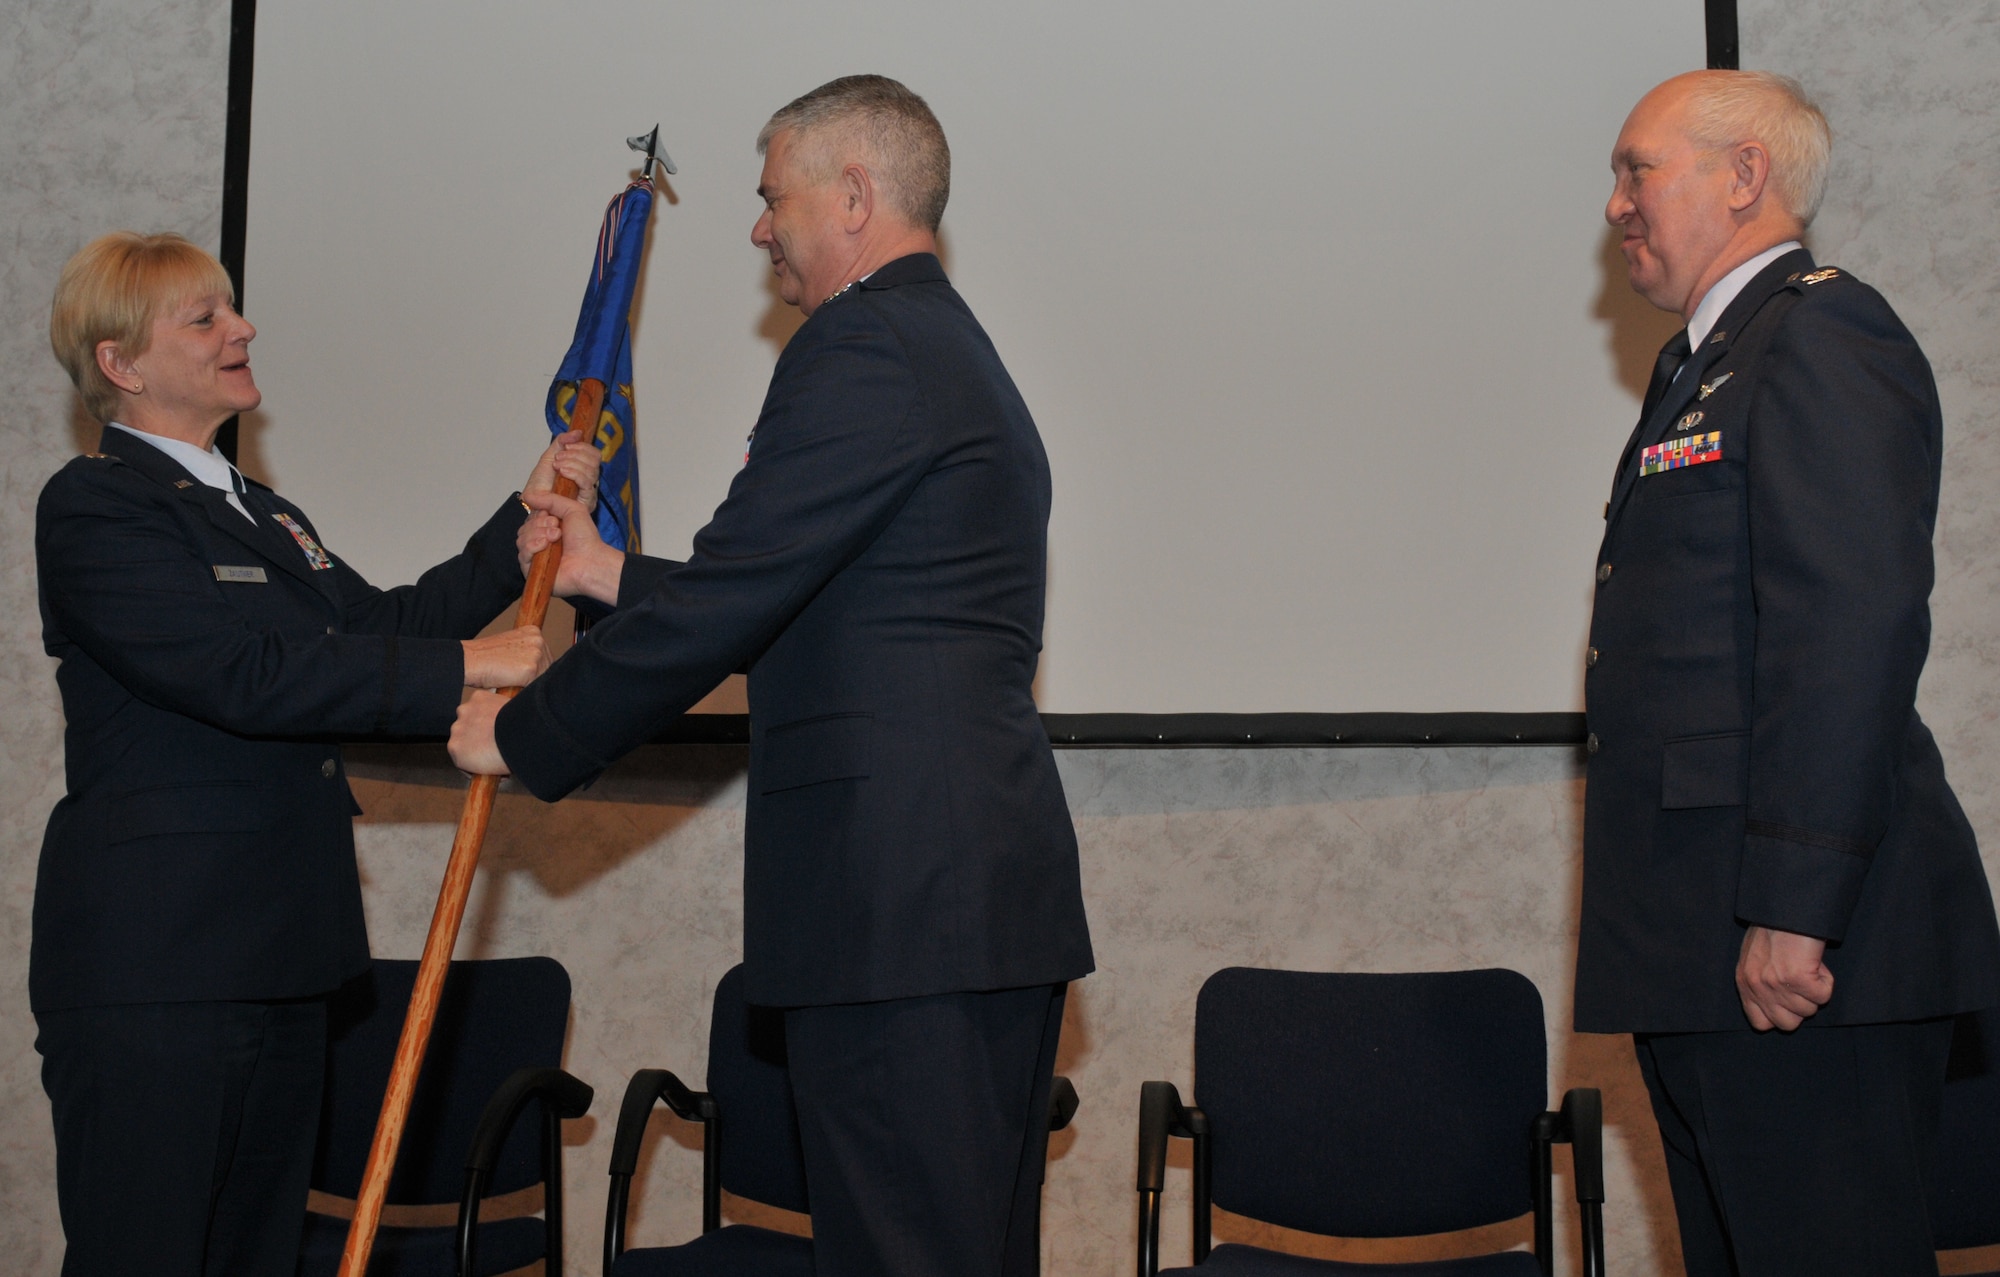 Lt. Col. Janice Zautner assumes command of the 109th Medical Group from Col. Shawn Clouthier, 109th Airlift Wing commander, during a ceremony here Feb. 7, 2016. Col. Douglas Cromack, outgoing commander, was the 109th MDG commander November 2014 through January 2016. (U.S. Air National Guard photo by Master Sgt. William Gizara/released)